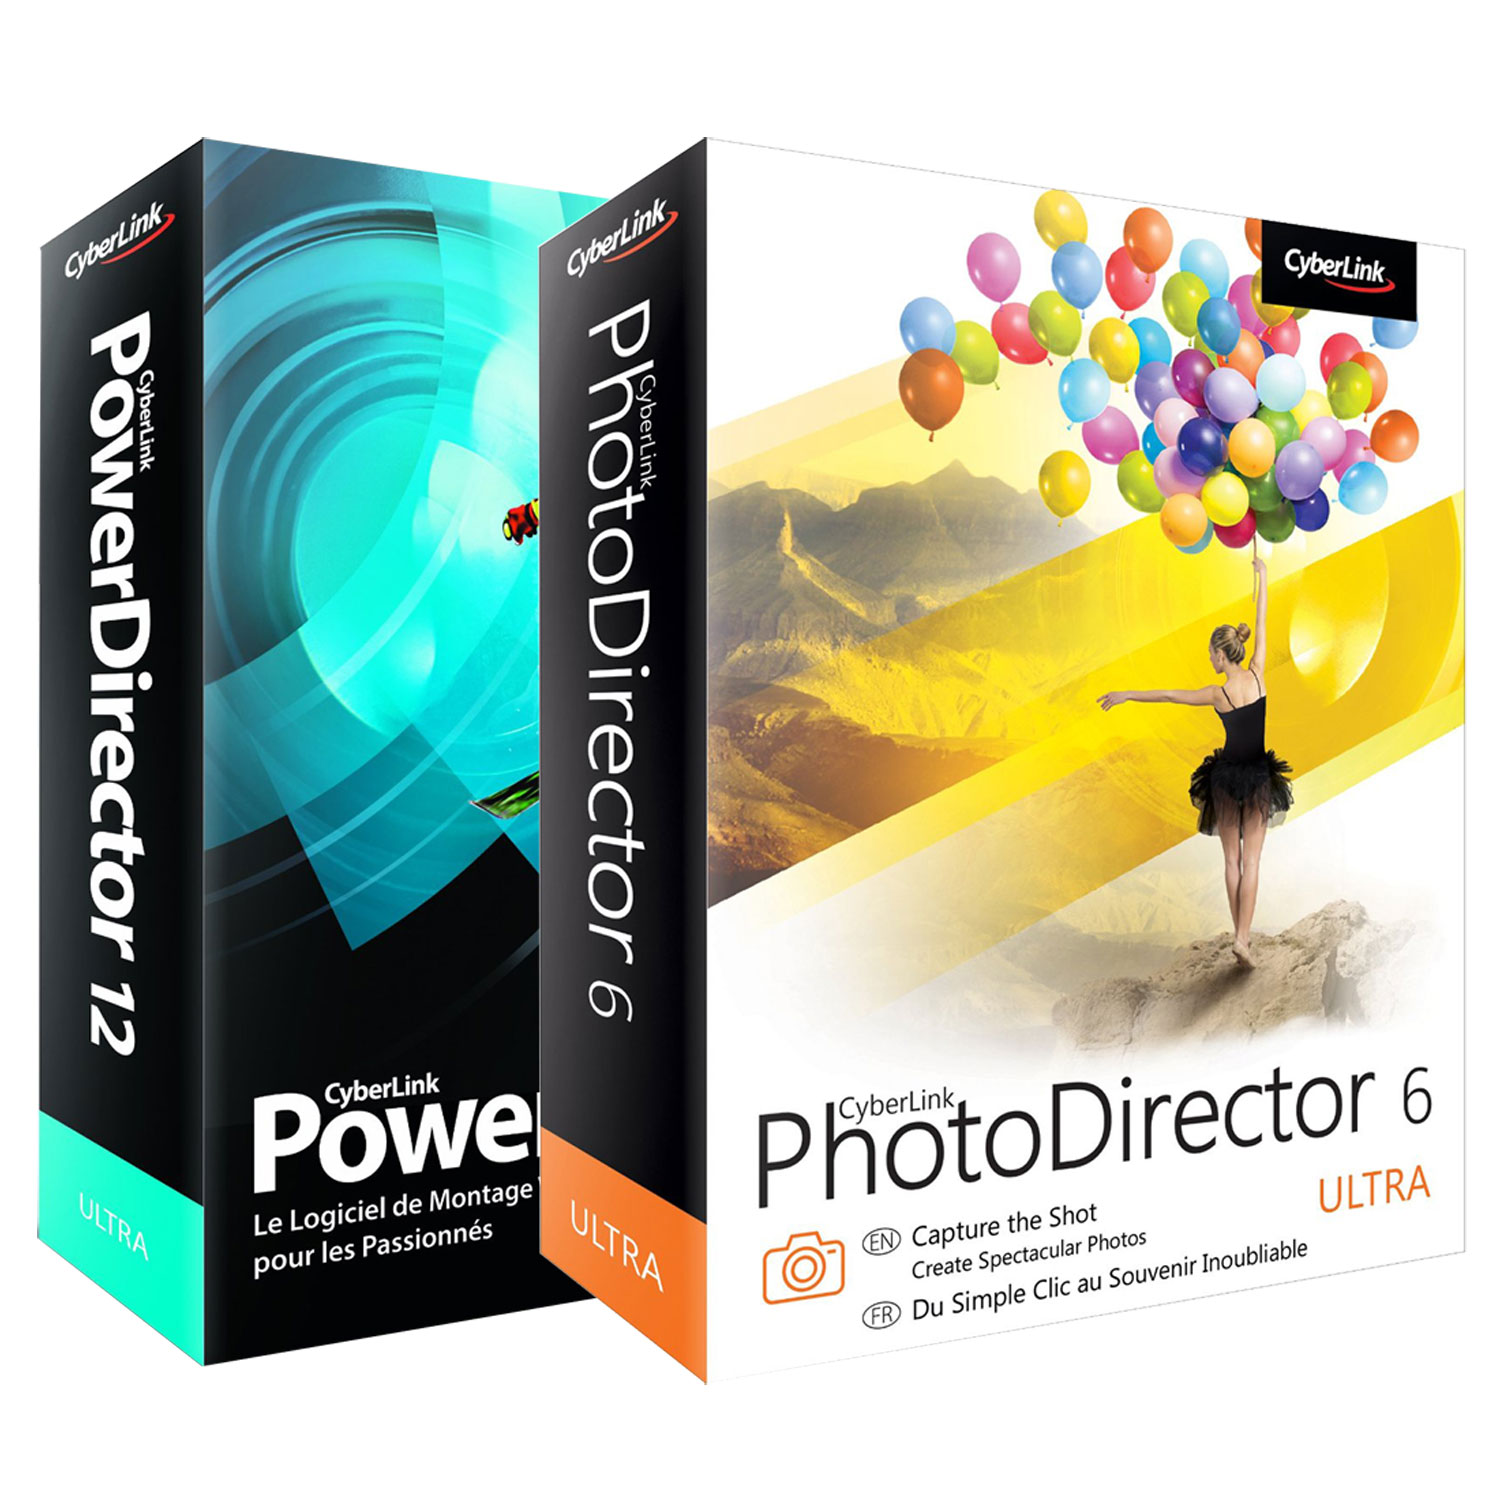 download the new version for windows CyberLink PhotoDirector Ultra 15.0.0907.0